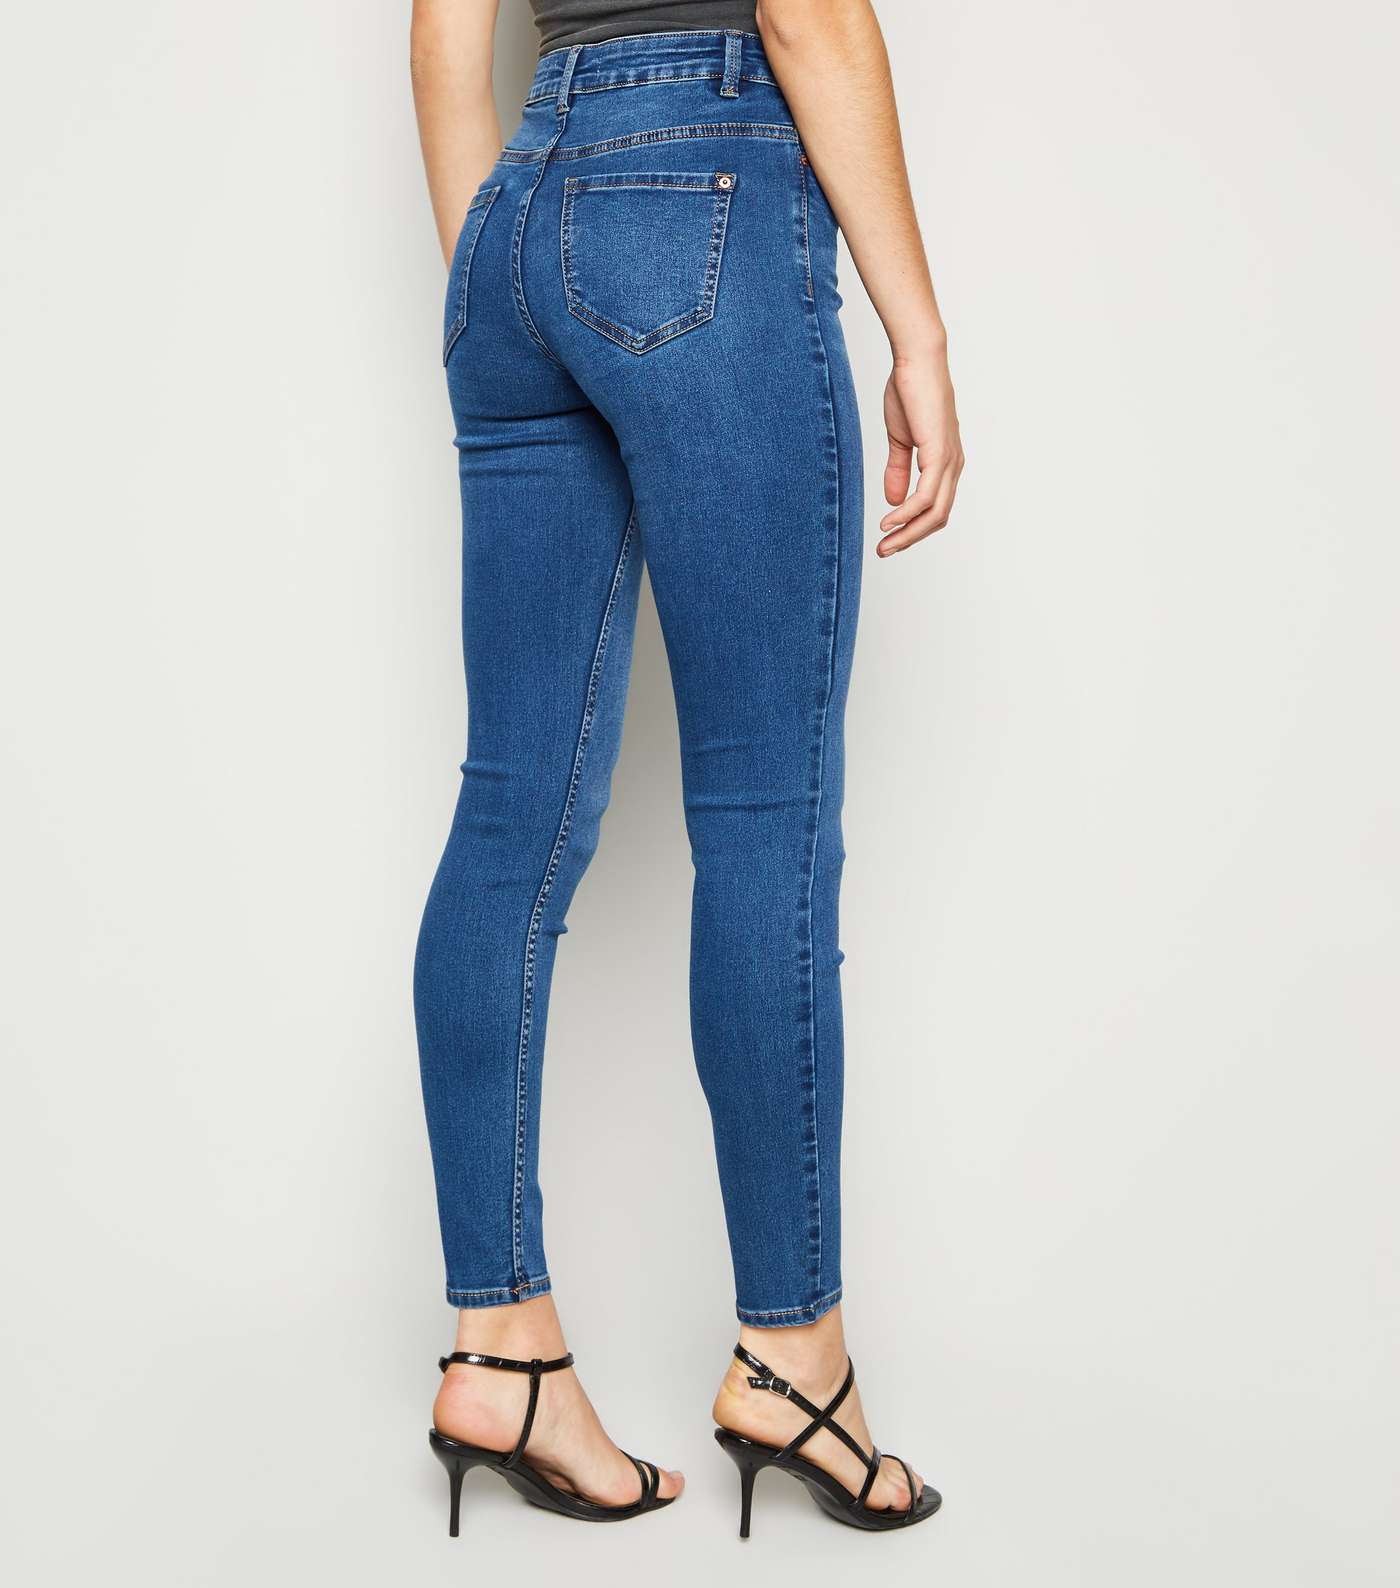 Bright Blue Mid Rise India Super Skinny Jeans Image 3